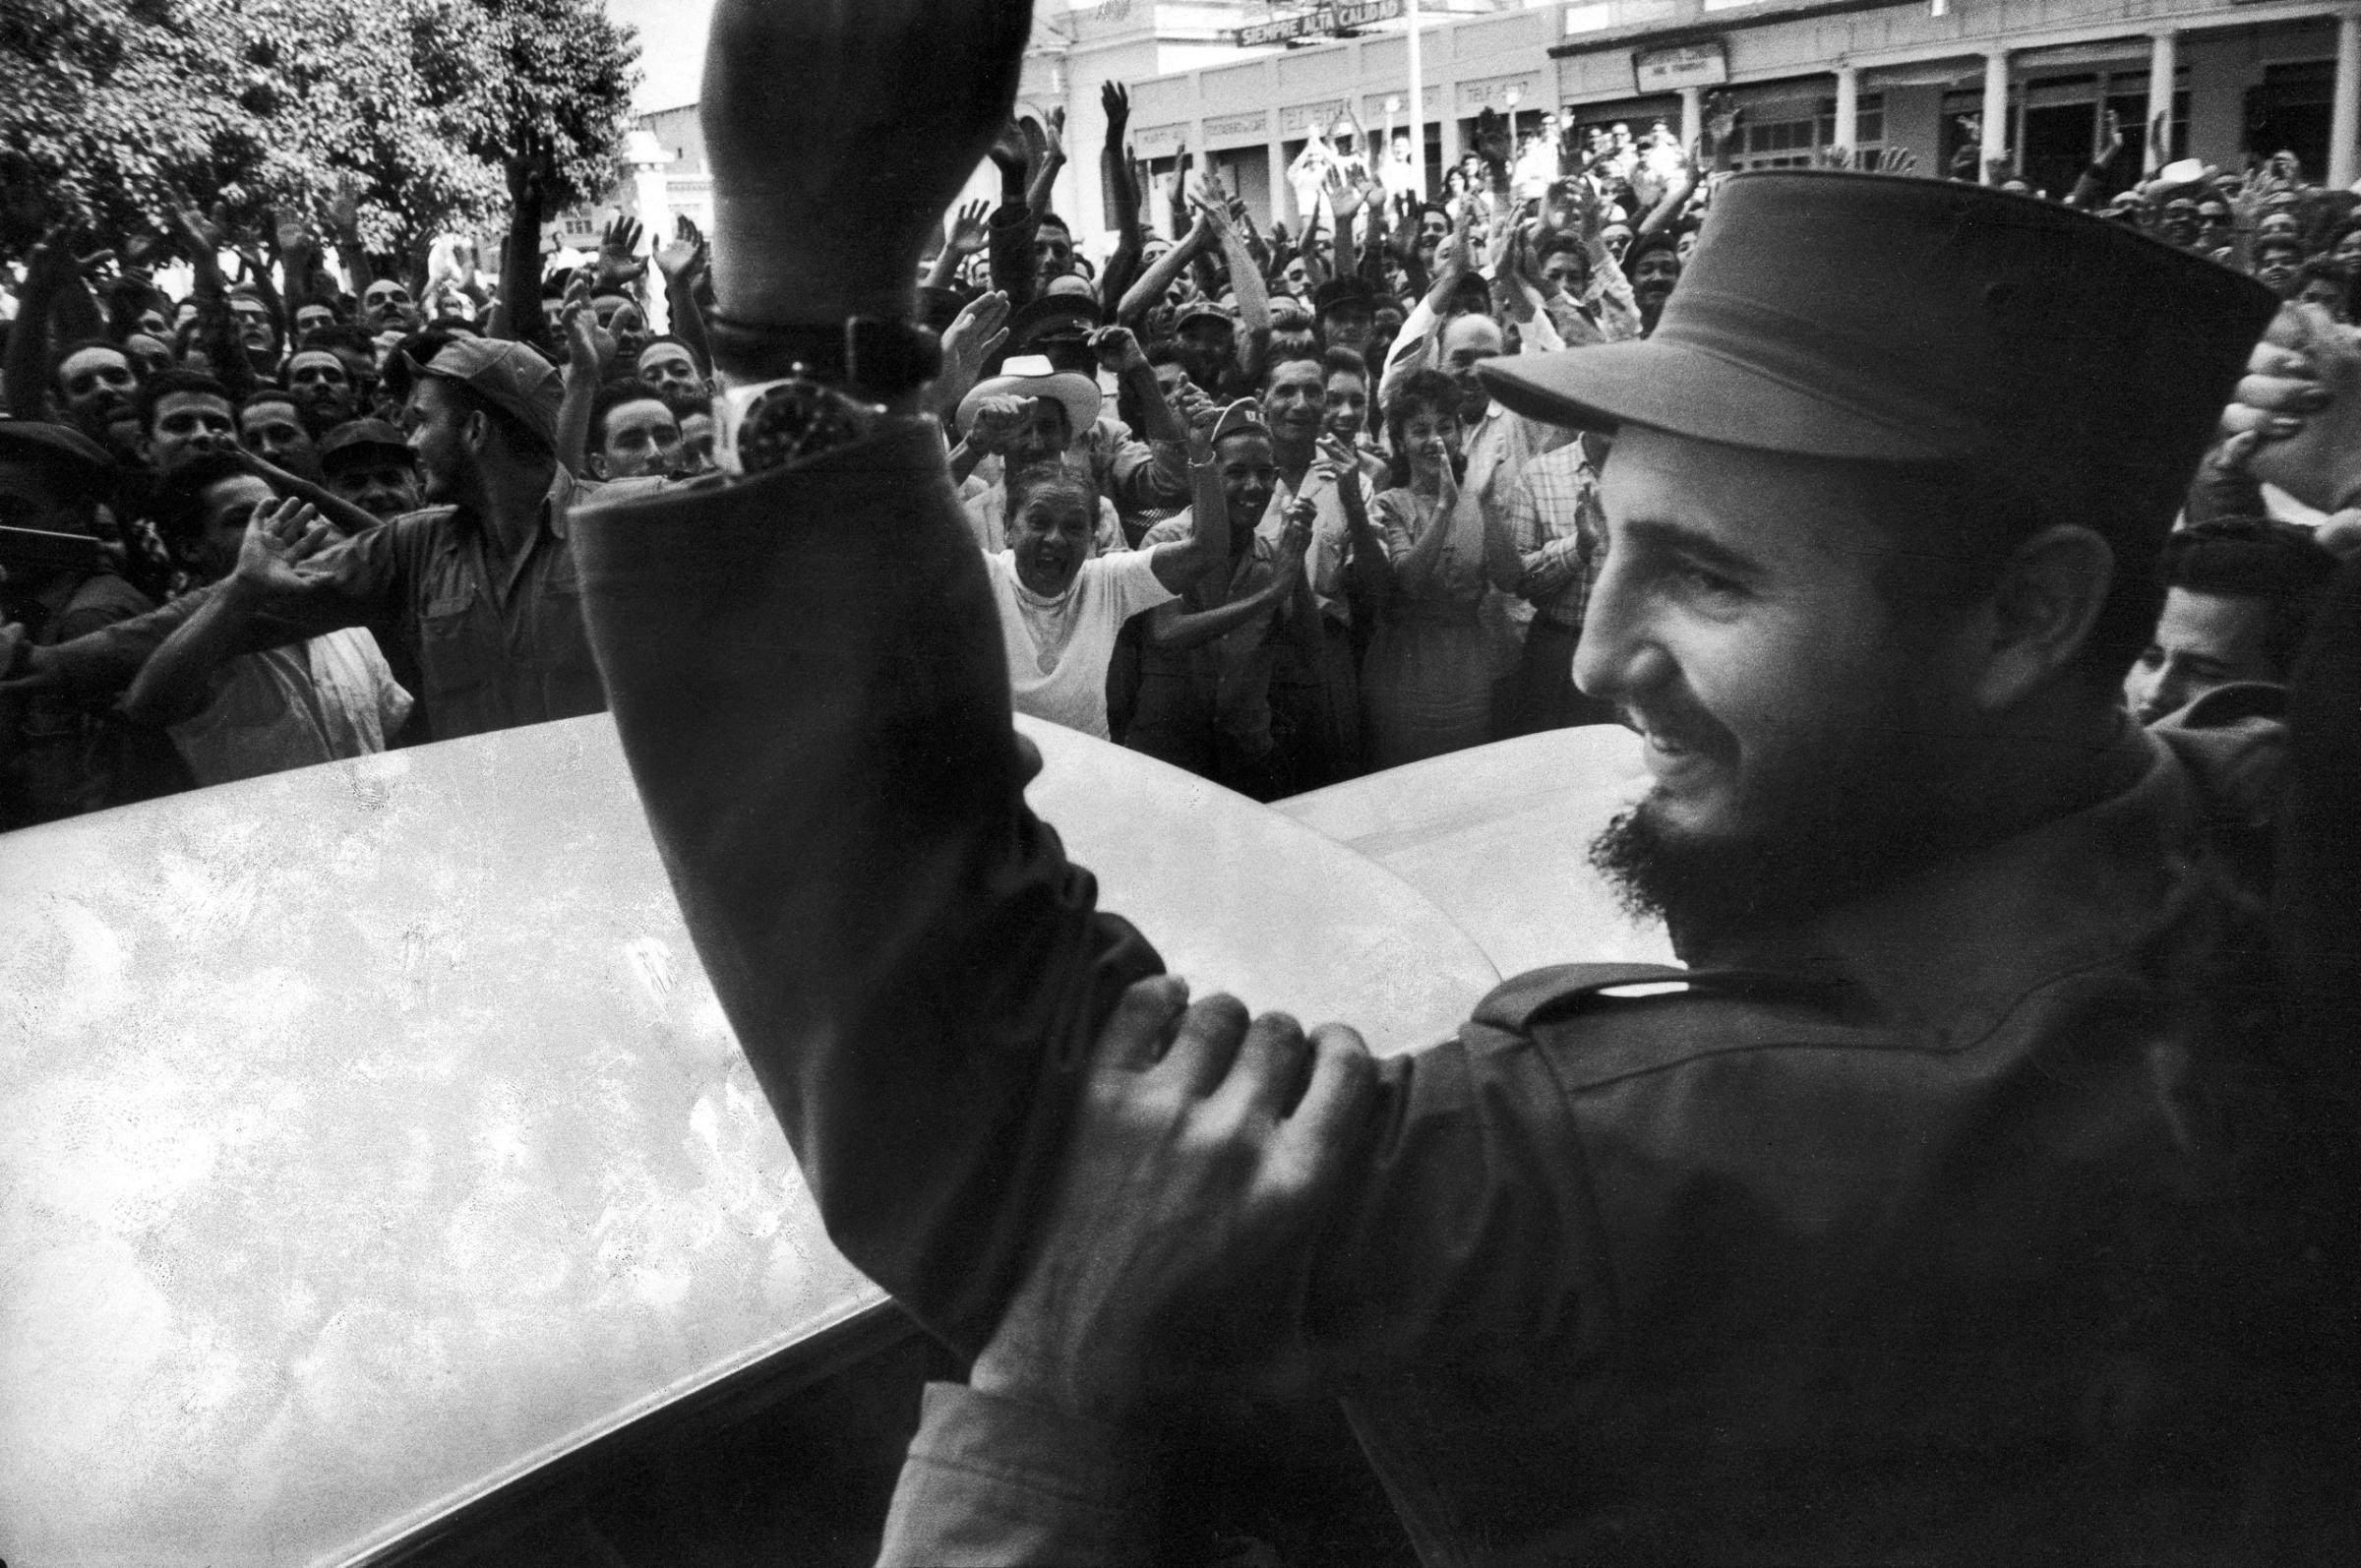 Fidel Castro cheered by crowds on victorious march to Havana after ousting Cuban dictator Fulgencio Batista, 1959.